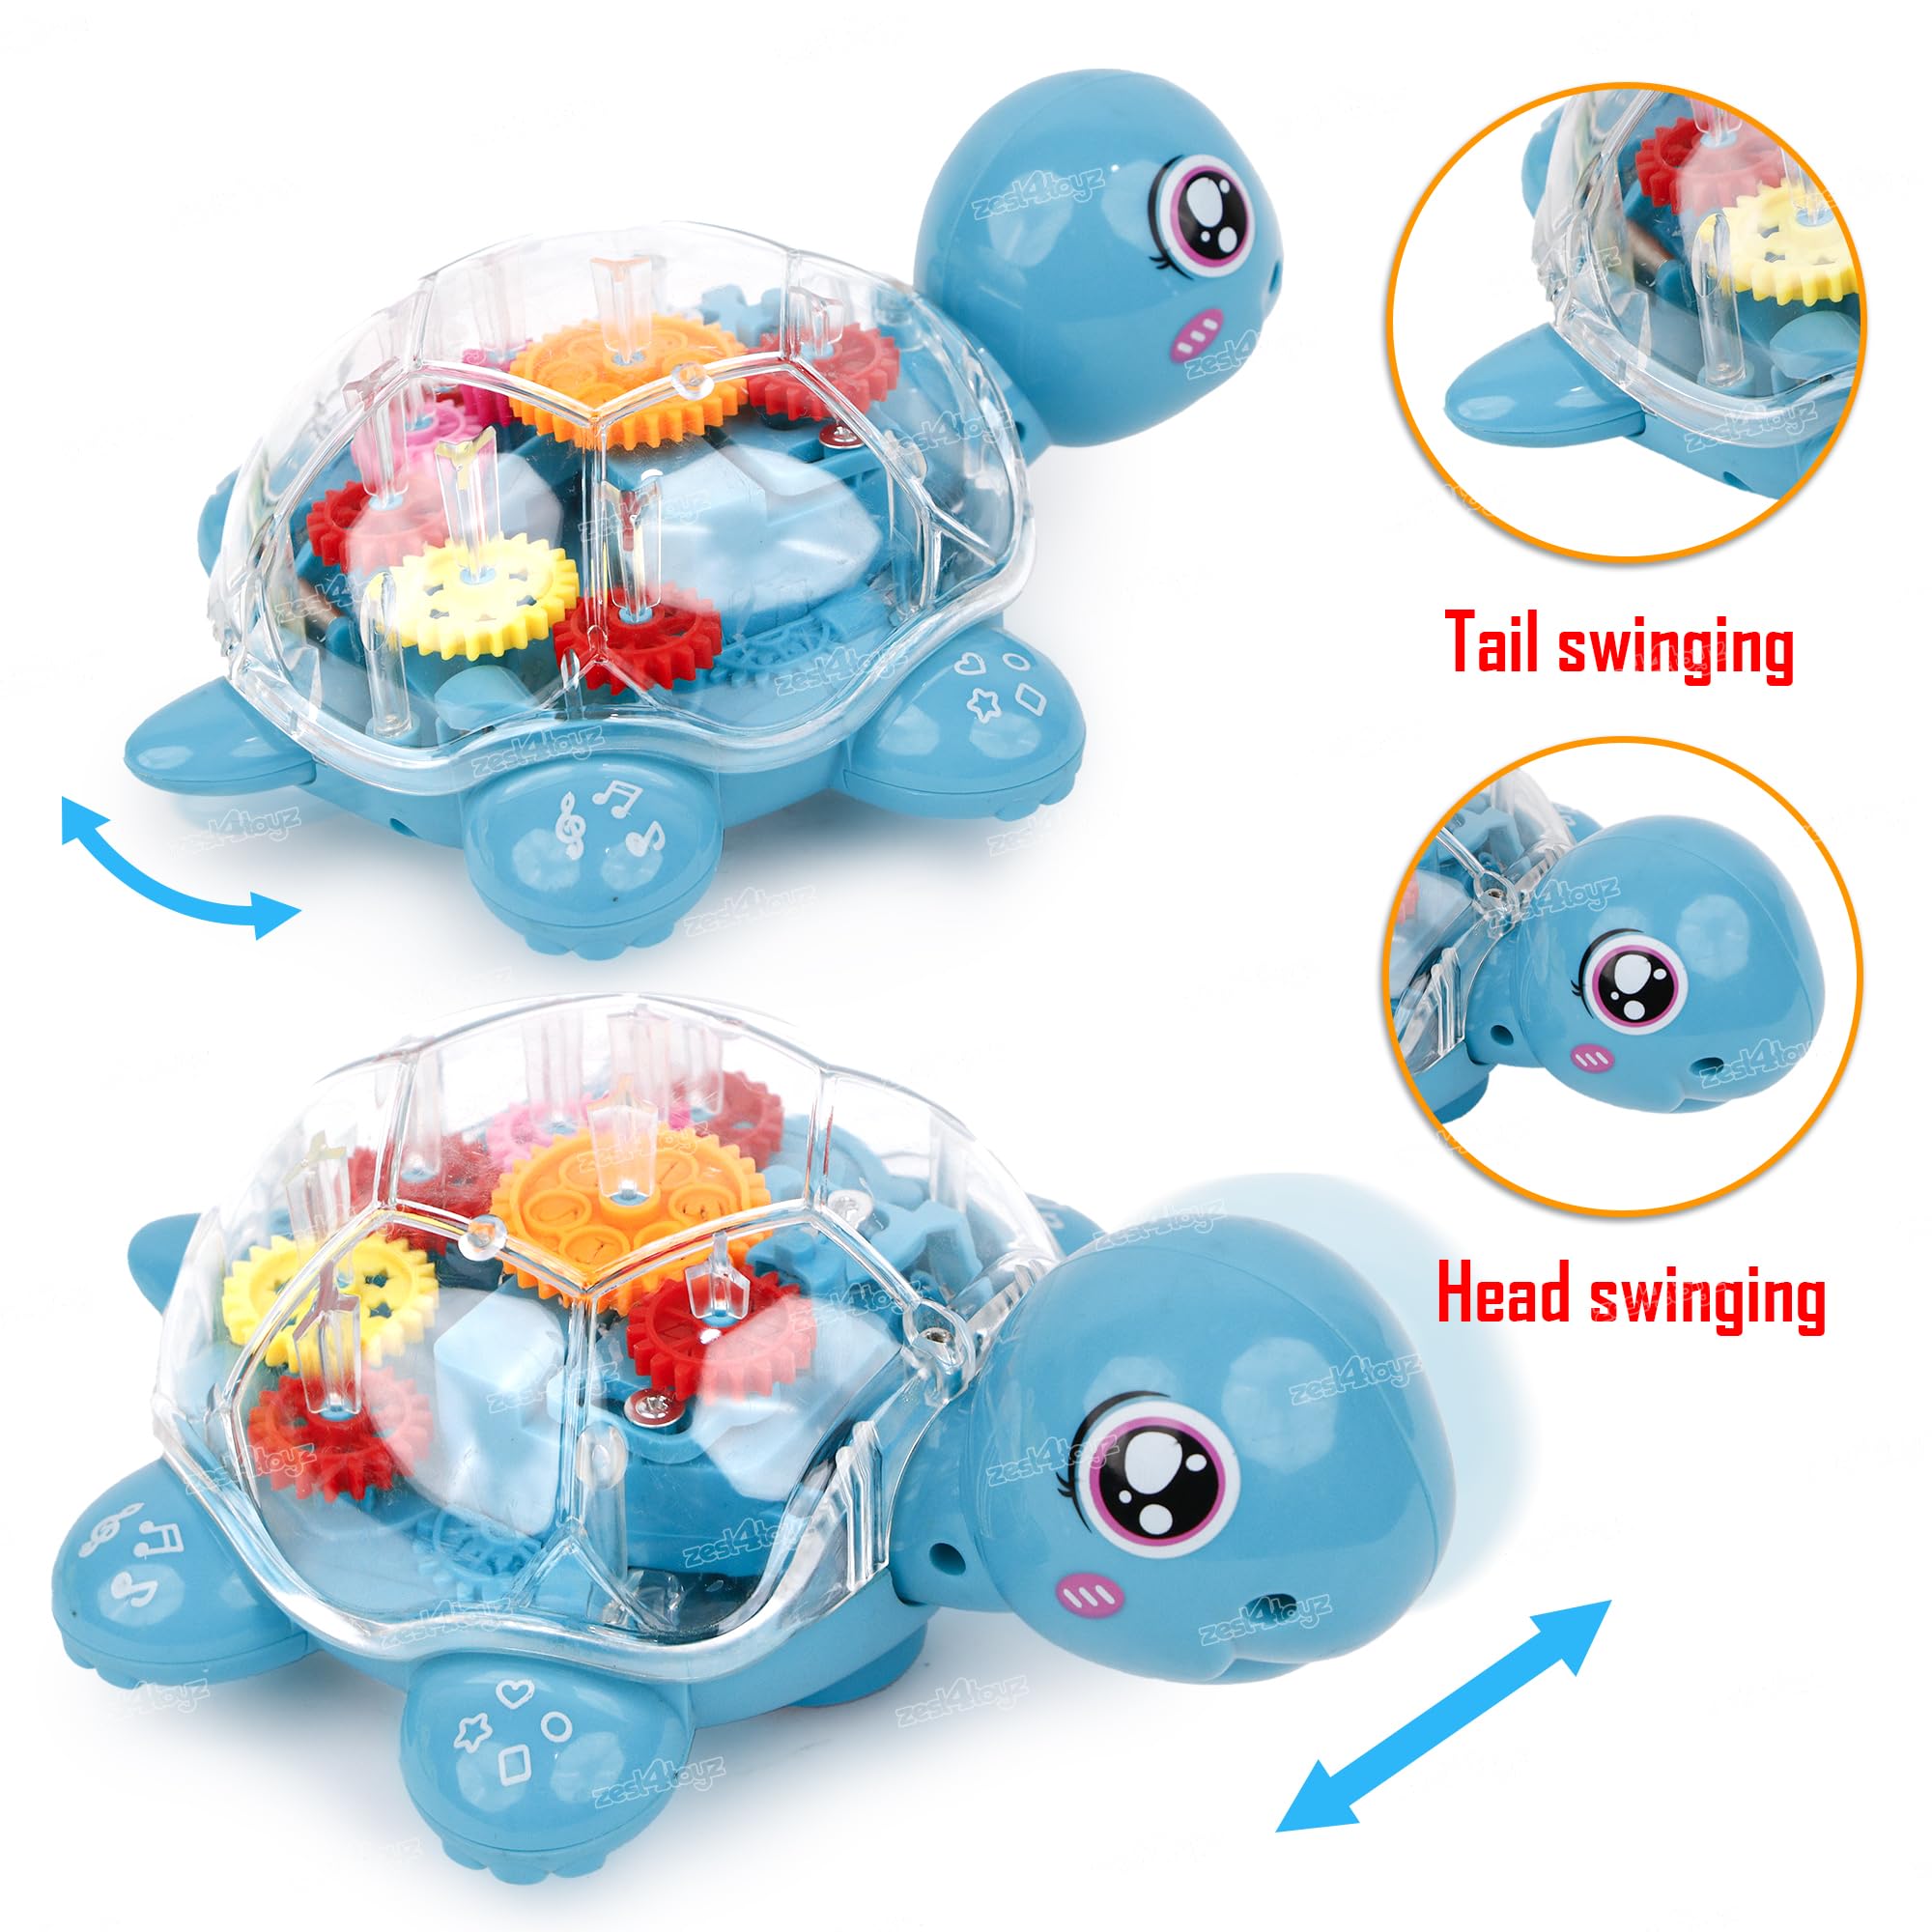 Zest 4 Toyz Musical Toy for Kids Moving Gear Turtle Bump & Go with Music & 3D Flashing Lights Transparent Gear Sound Toy for Babies -Multlcolor